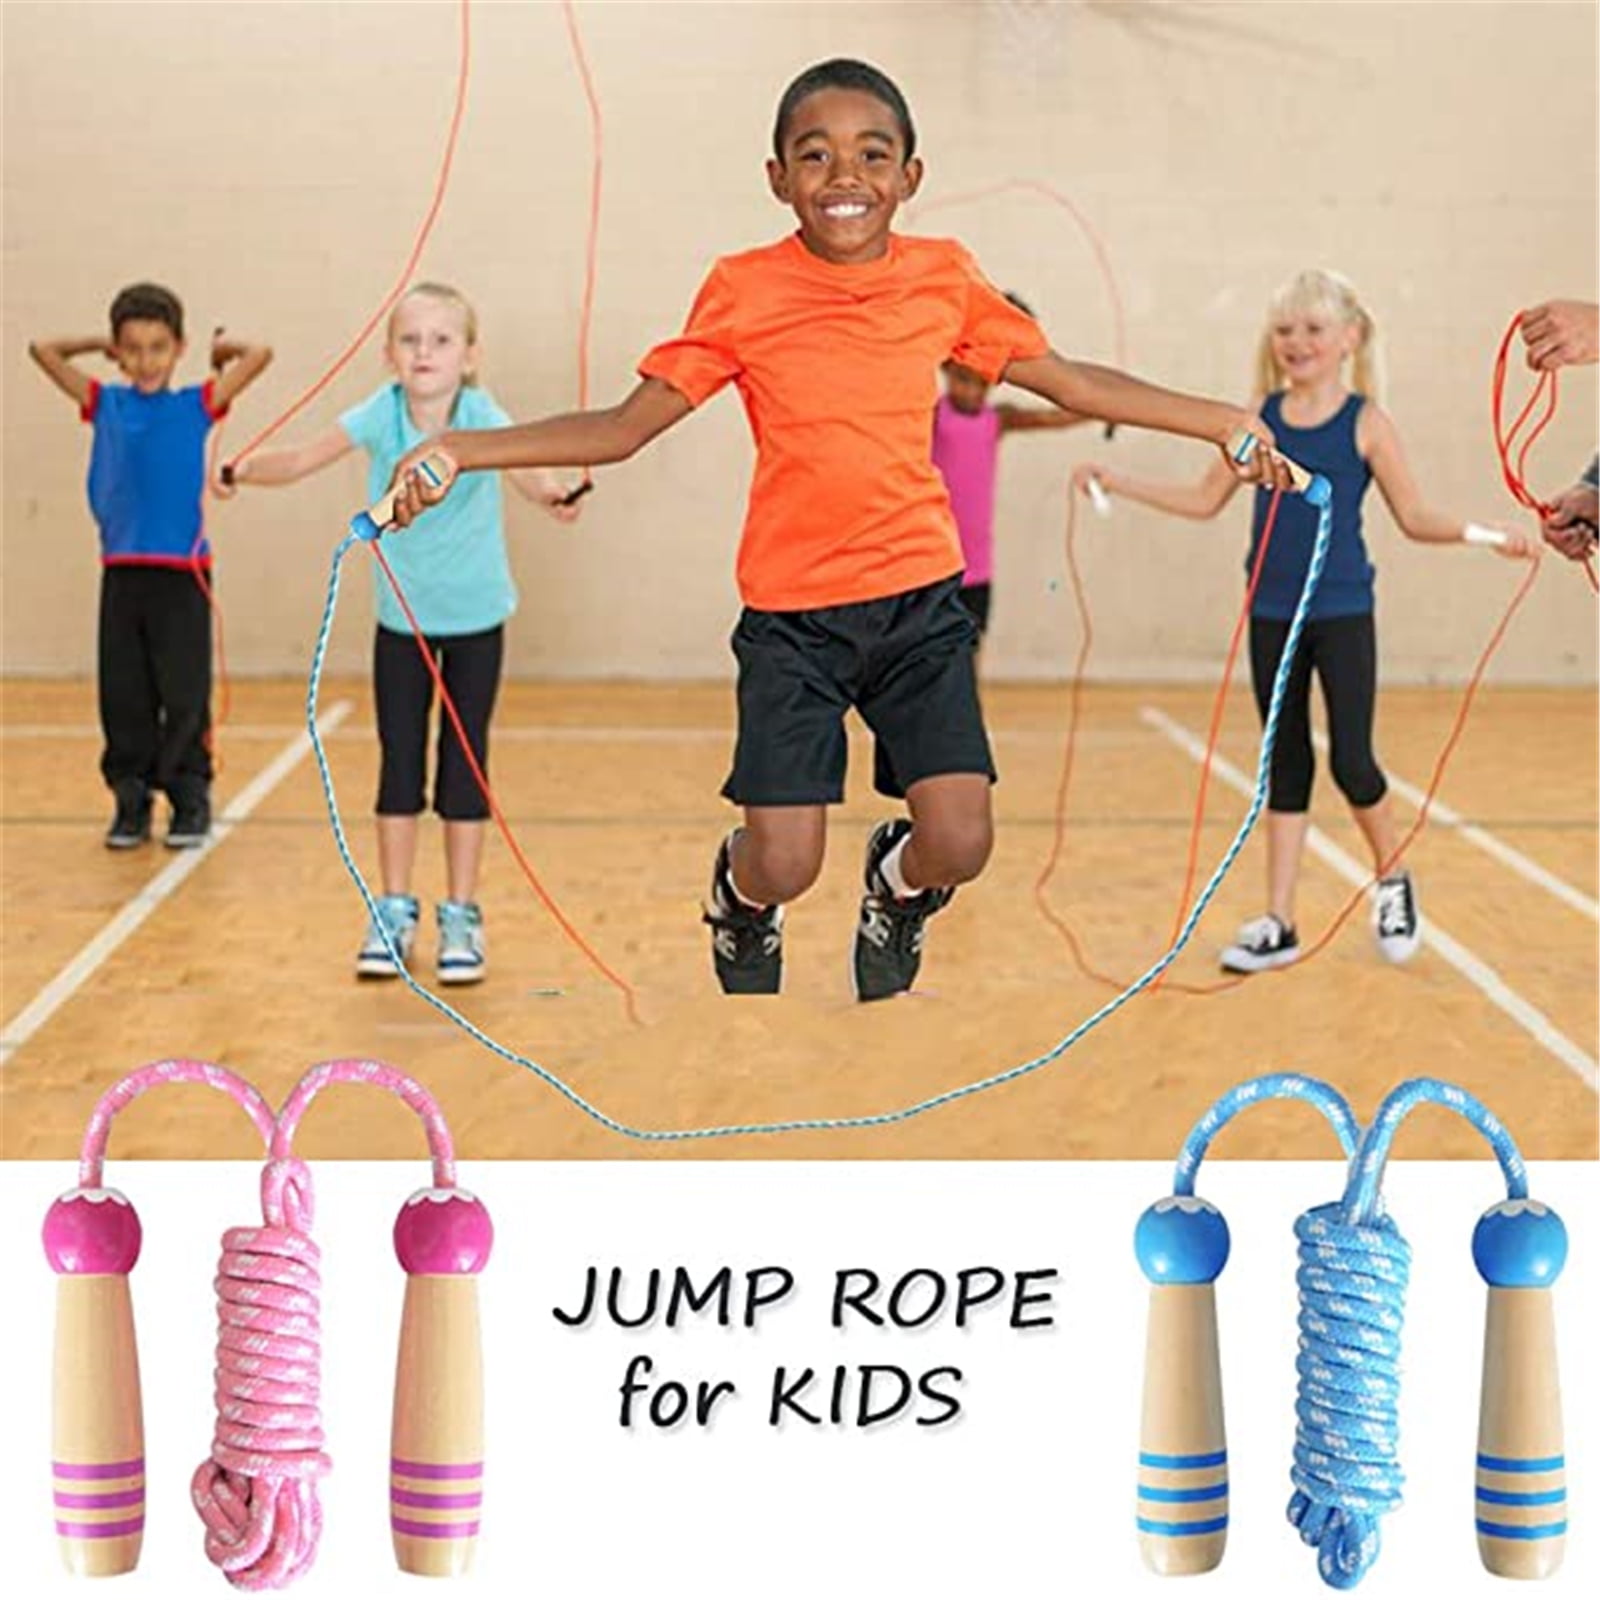 Kids Wooden Skipping Rope Children Exercise Jumping Game Fitness Boxing Gym NEW 